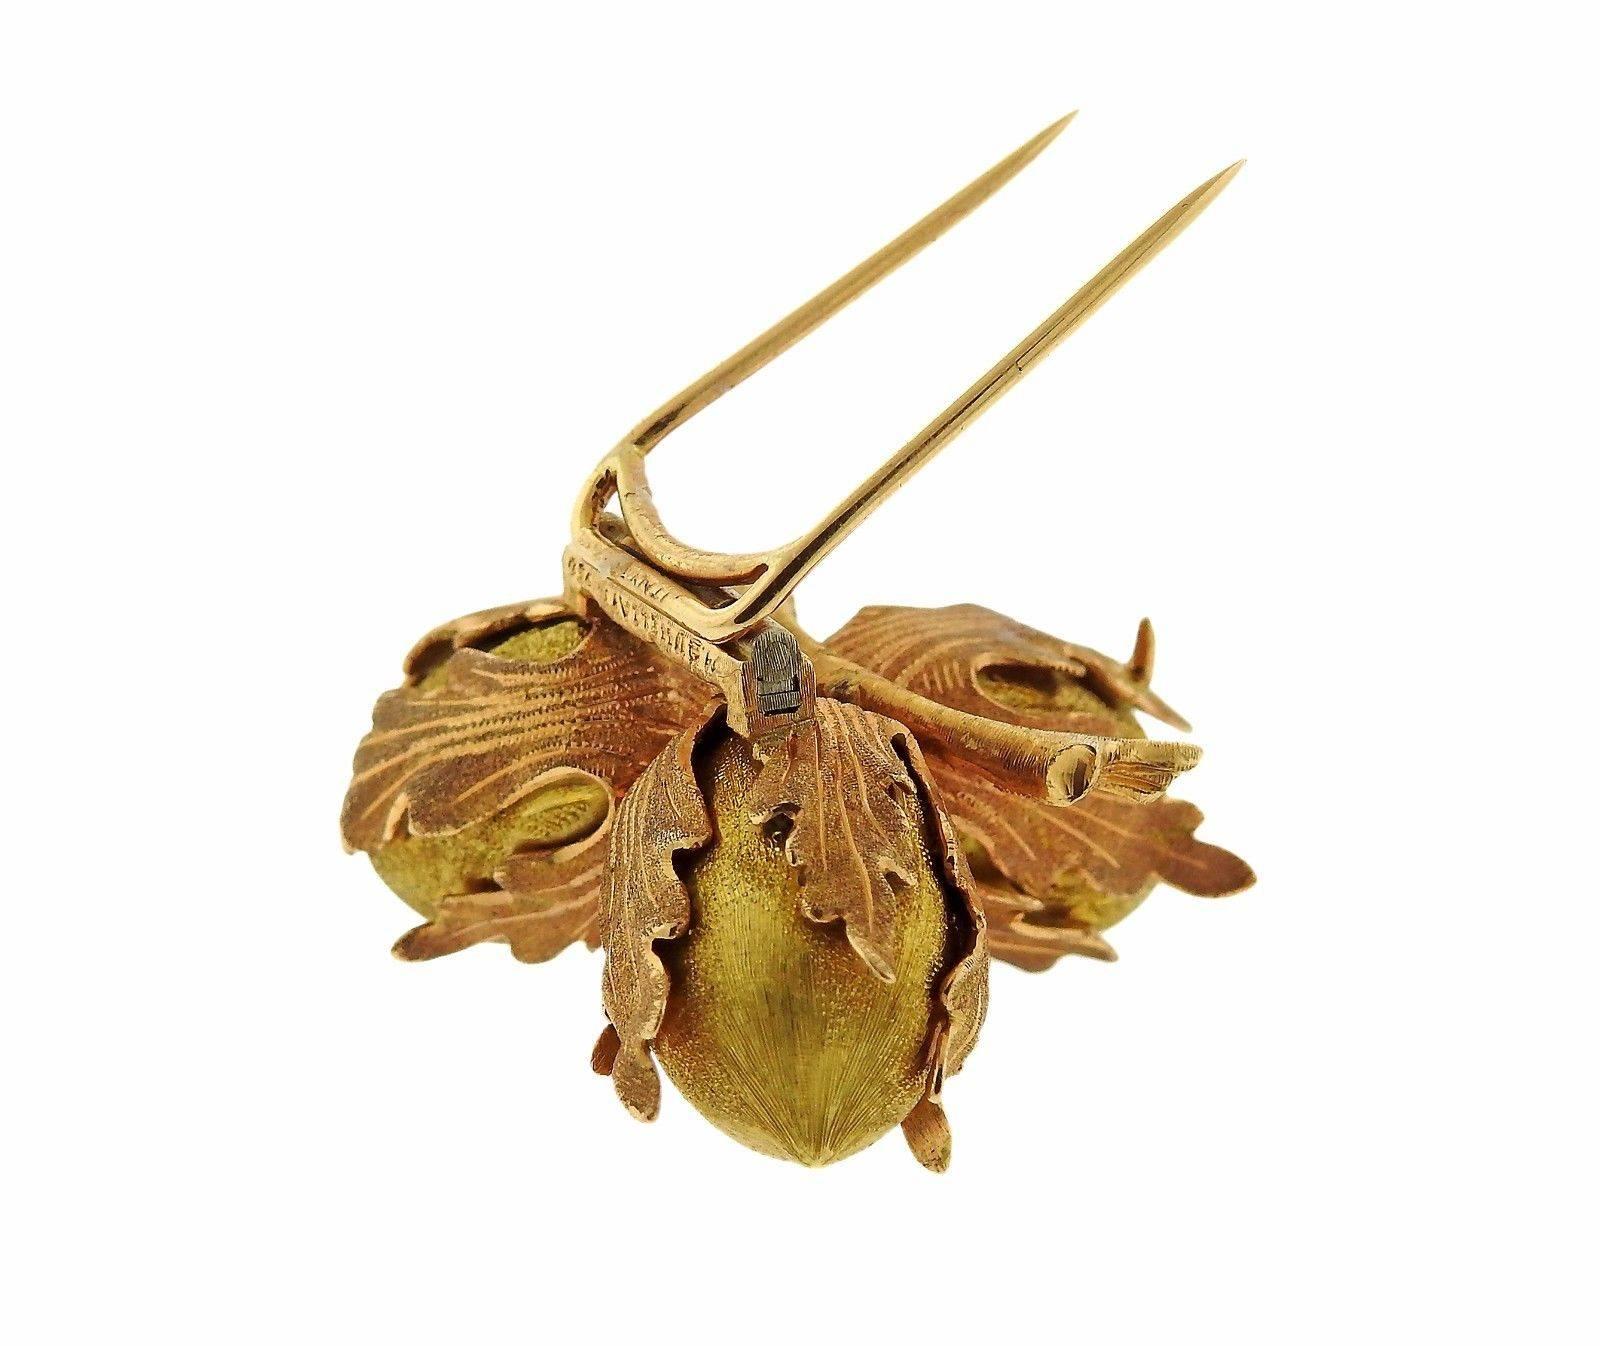 An 18k yellow and rose gold brooch by Buccellati.  The brooch measures 33mm x 35mm and weighs 25.7 grams.  Marked: Italy, Buccellati, 750.